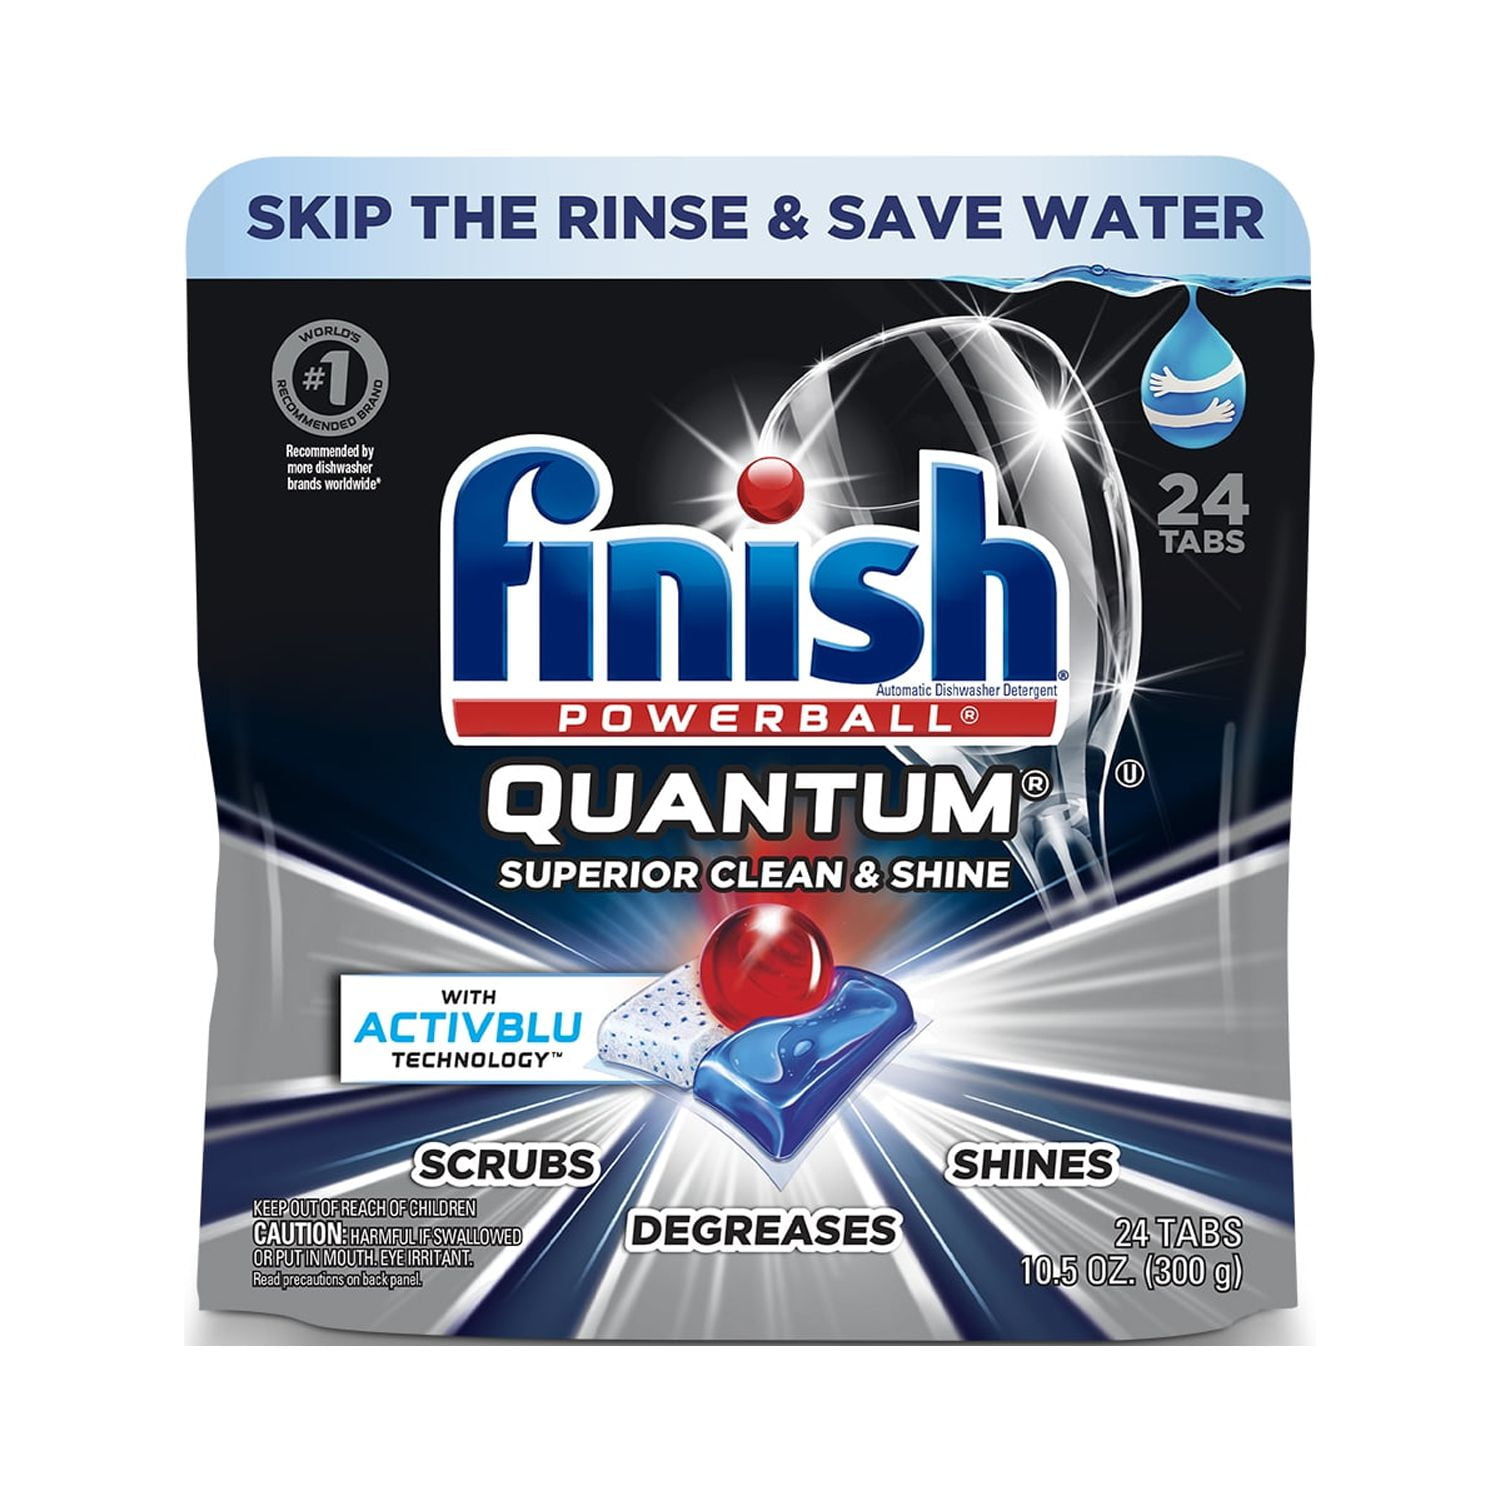 Finish Quantum Infinity Shine - 70 Count - Dishwasher Detergent - Powerball  - Our Best Ever Clean and Shine - Dishwashing Tablets - Dish Tabs  (Packaging May Vary)